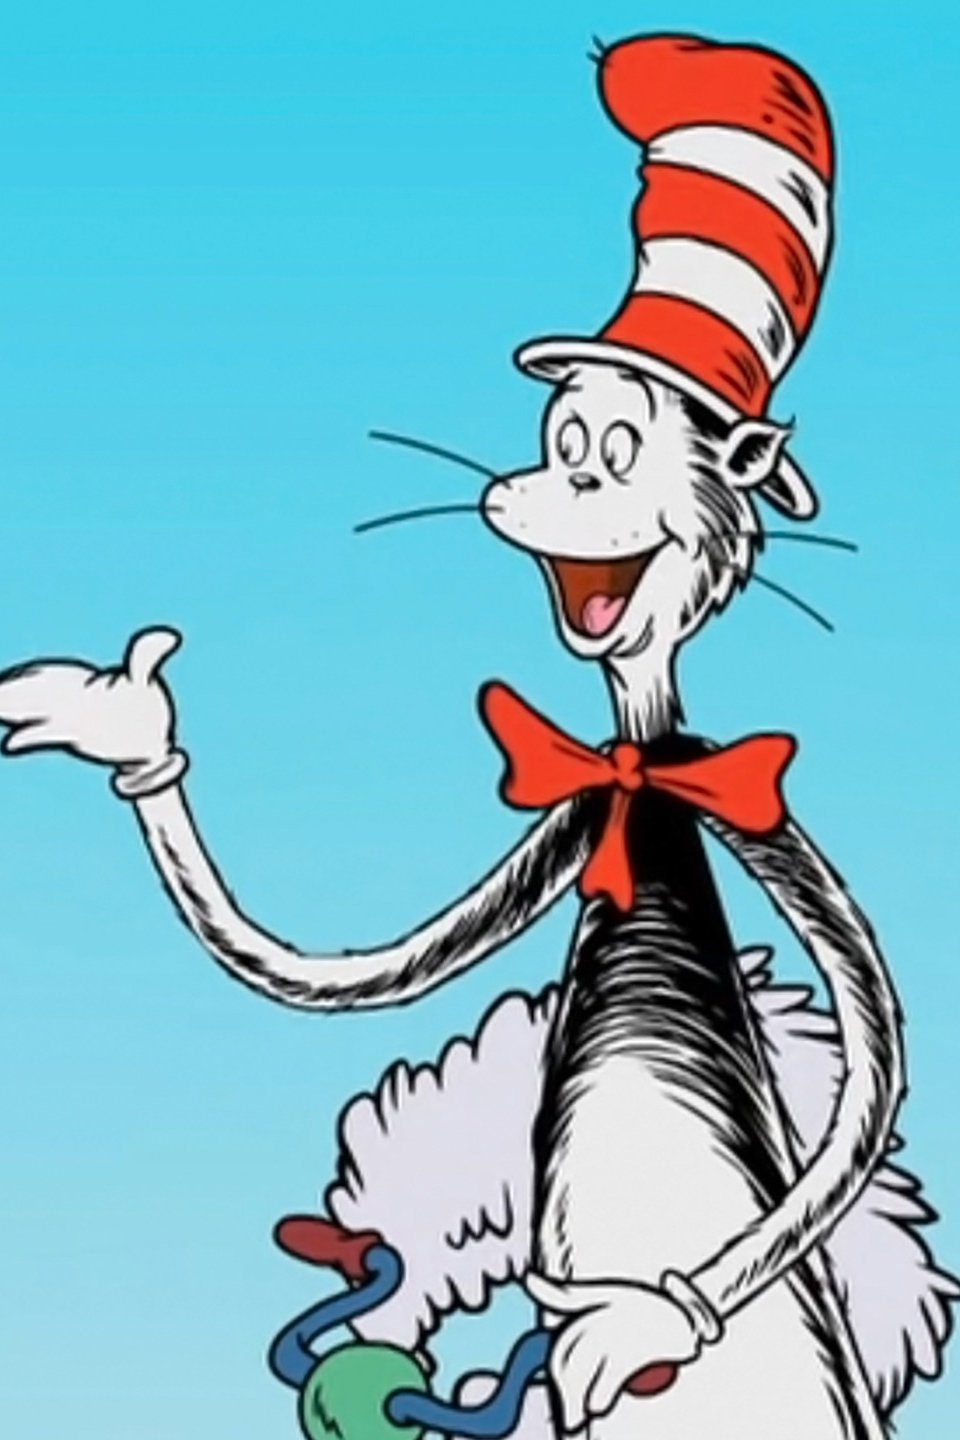 Watch The Cat In The Hat Knows a Lot About Christmas (2014) Online